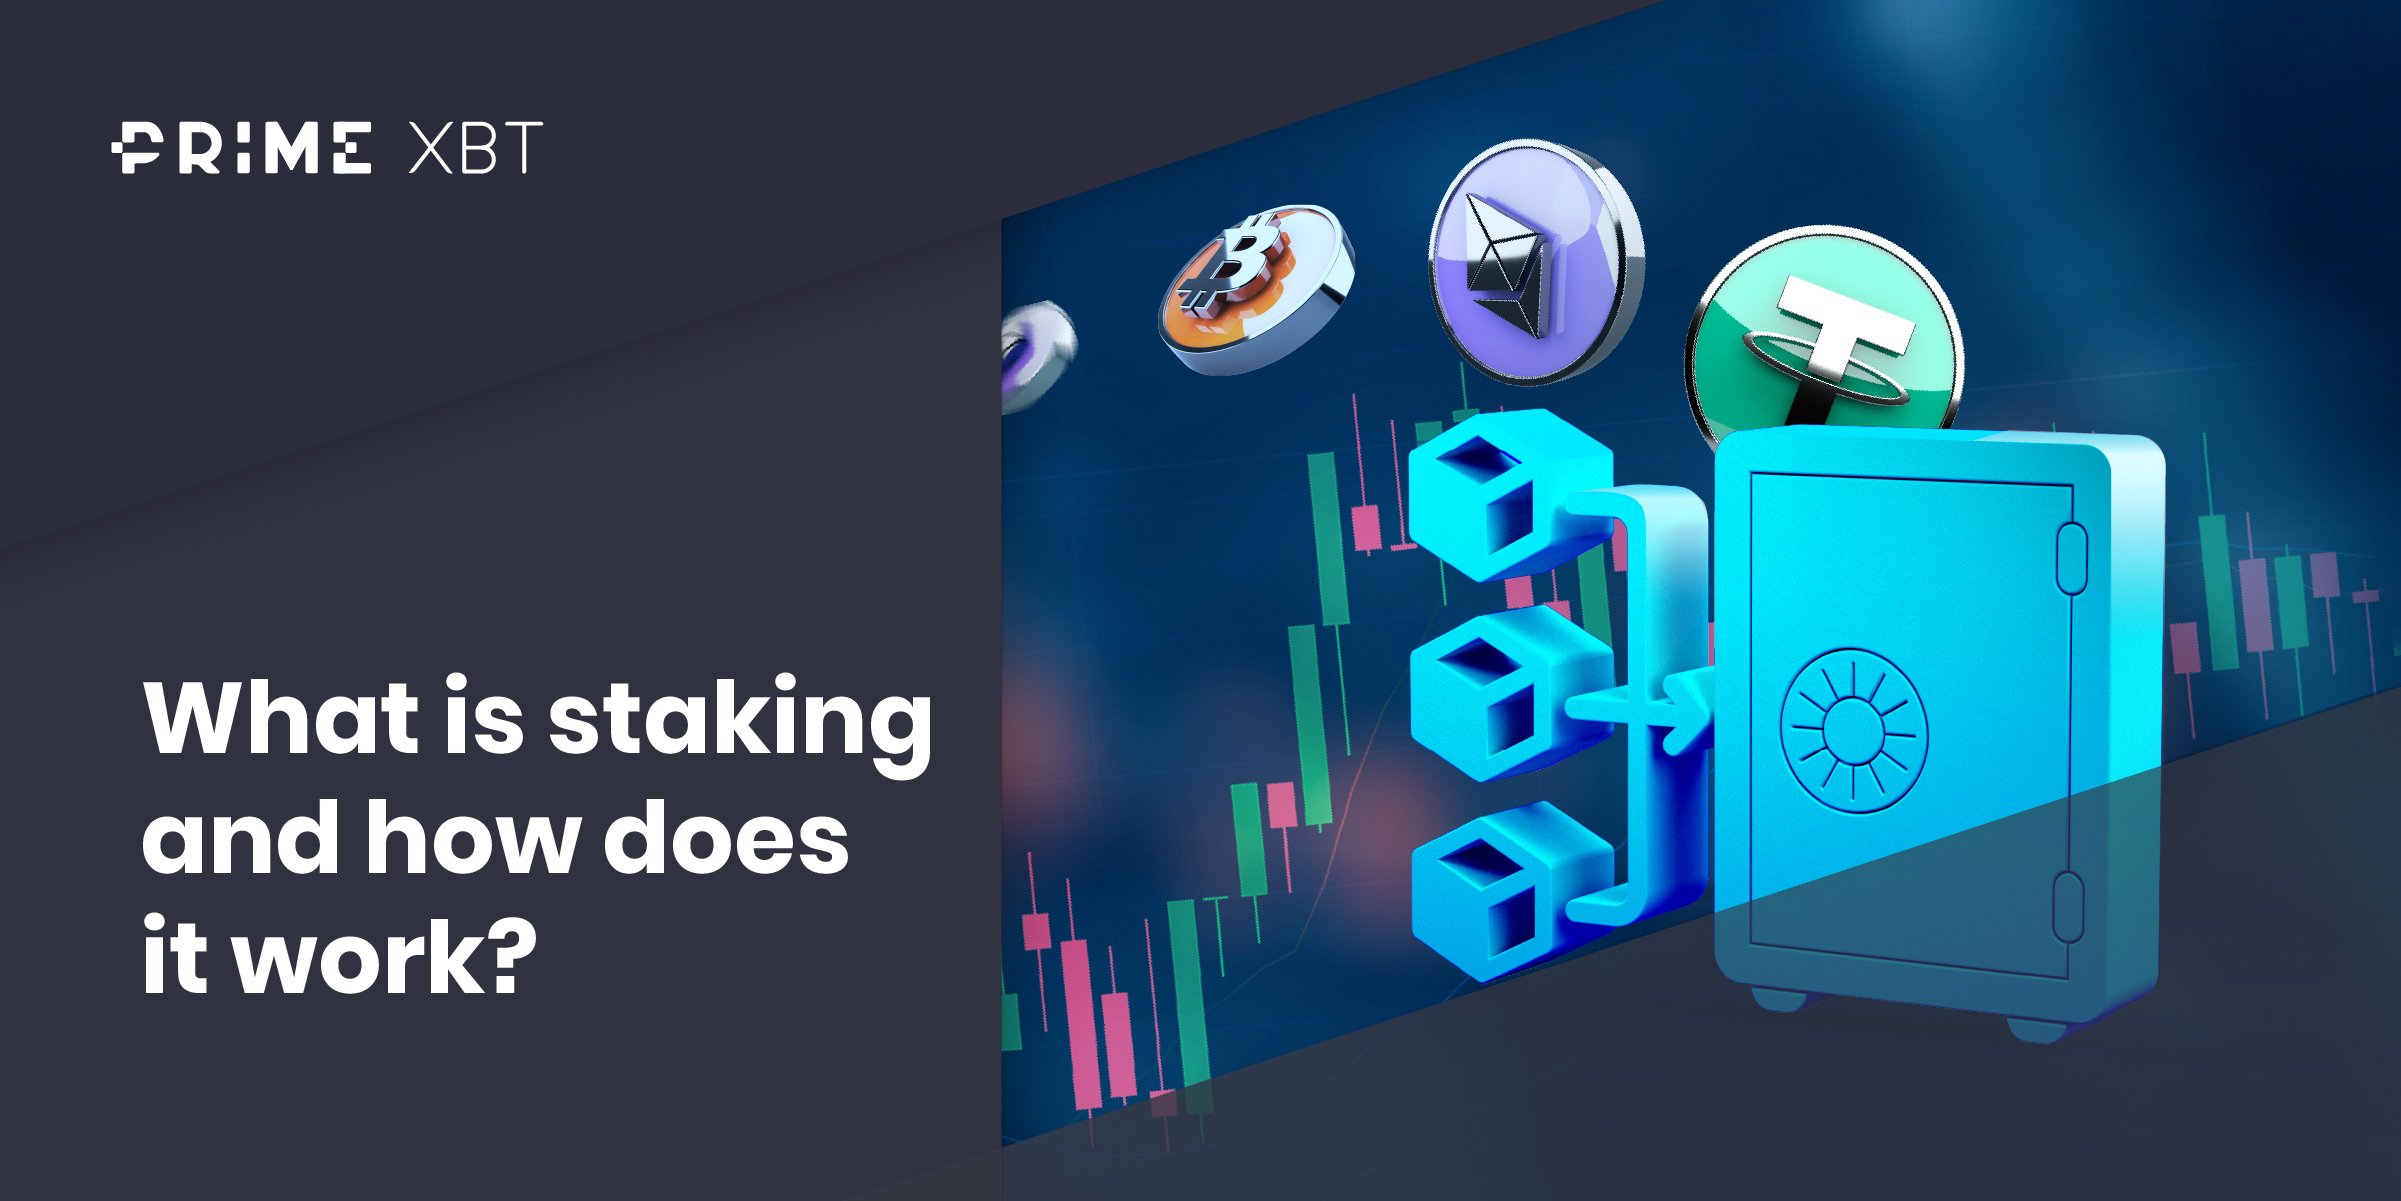 What is staking and how does it work? - staking